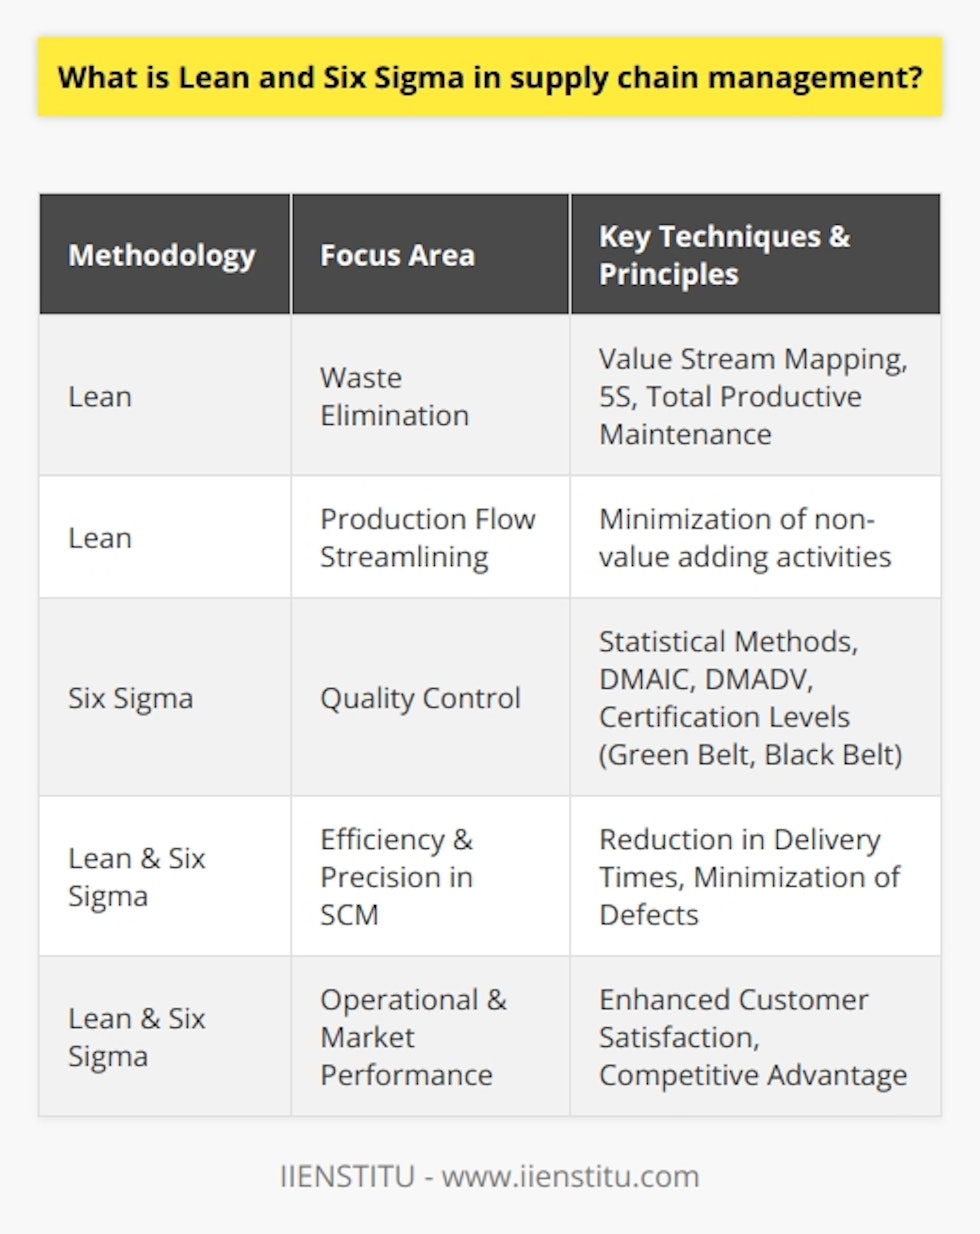 Lean and Six Sigma are strategic methodologies that collectively enhance supply chain operations. Lean, with roots in the Toyota Production System, emphasizes waste elimination through the minimization of activities that do not add customer value. Its principles underscore the importance of streamlining production flow and are designed to address wastefulness in seven key areas: excess production, waiting times, unnecessary transport, surplus inventory, excessive motion, over-processing, and product defects. Applying Lean involves techniques such as value stream mapping to visualize product flow and identify barriers to efficiency, while 5S is focused on workplace organization, and total productive maintenance aims to prevent equipment failure.Conversely, Six Sigma targets quality control, aiming to reduce process variation and improve product consistency. Its foundation lies in the utilization of statistical methods, striving for a high standard of fewer than 3.4 defects per million opportunities. Six Sigma operates under two key frameworks: DMAIC for process improvement and DMADV when new process designs are required. These frameworks drive problem-solving with a structured approach to identify, analyze, and counteract performance issues. Six Sigma also emphasizes the cultivation of a quality-centric culture and the employment of certified professionals, known as Green Belts and Black Belts, to spearhead projects.The fusion of Lean and Six Sigma for supply chain management hones in on the ultimate goal of delivering products efficiently and without error. When incorporated into the supply chain, the collective methodology seeks to sharpen operations by honing in on rapid delivery and minimal defects. This strategic combination can lead to stellar performance as it benefits from both the agile responsiveness advocated by Lean principles and the meticulous precision fostered by Six Sigma.The effectiveness of Lean and Six Sigma within the supply chain is not solely based on process improvements but extends to the positive impact on customer satisfaction and the market standing of organizations. By embracing these methods, companies not only position themselves to elevate operational performance but also secure a robust competitive edge. The implementation of Lean and Six Sigma is dynamic and should align with the unique contexts of individual businesses, demanding careful consideration of their operational goals and constraints. Employing these methodologies alone or in tandem can be a transformative move, leading businesses toward sustainable growth and development in an increasingly complex global market.